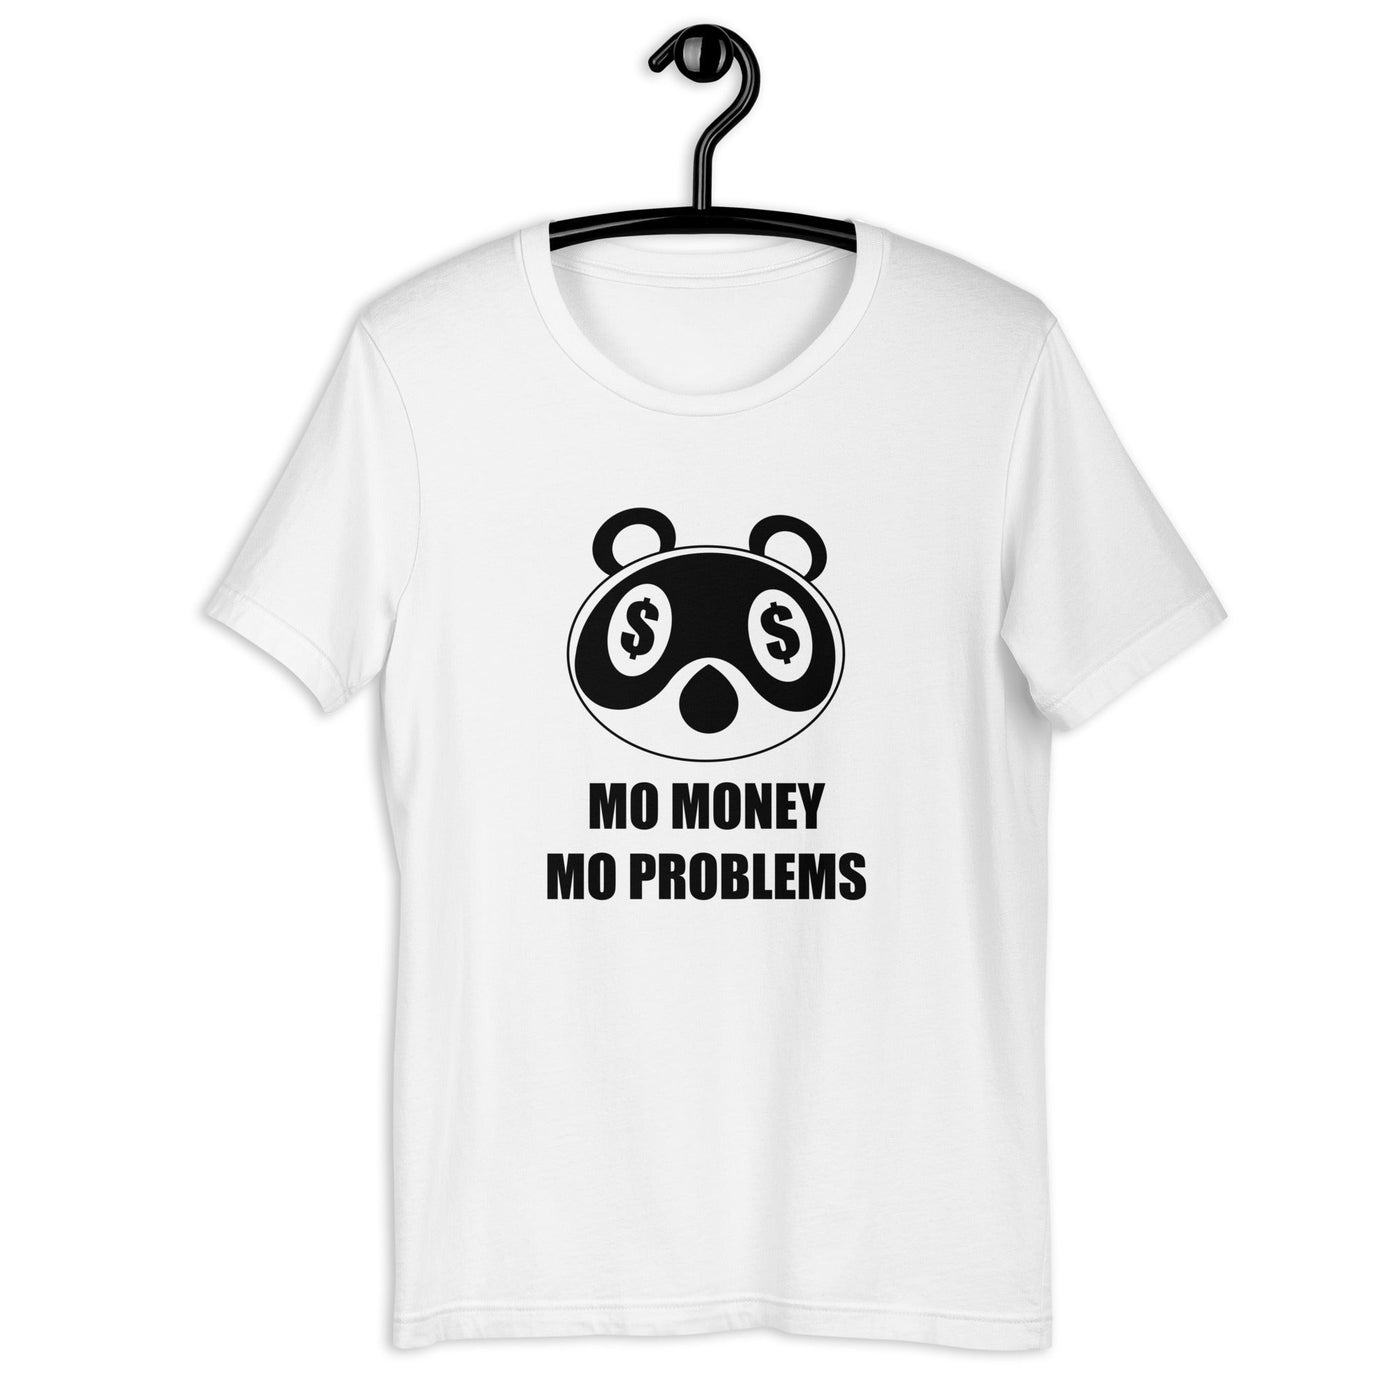 Mo Money Mo Problems | Unisex t-shirt | Animal Crossing Threads and Thistles Inventory 